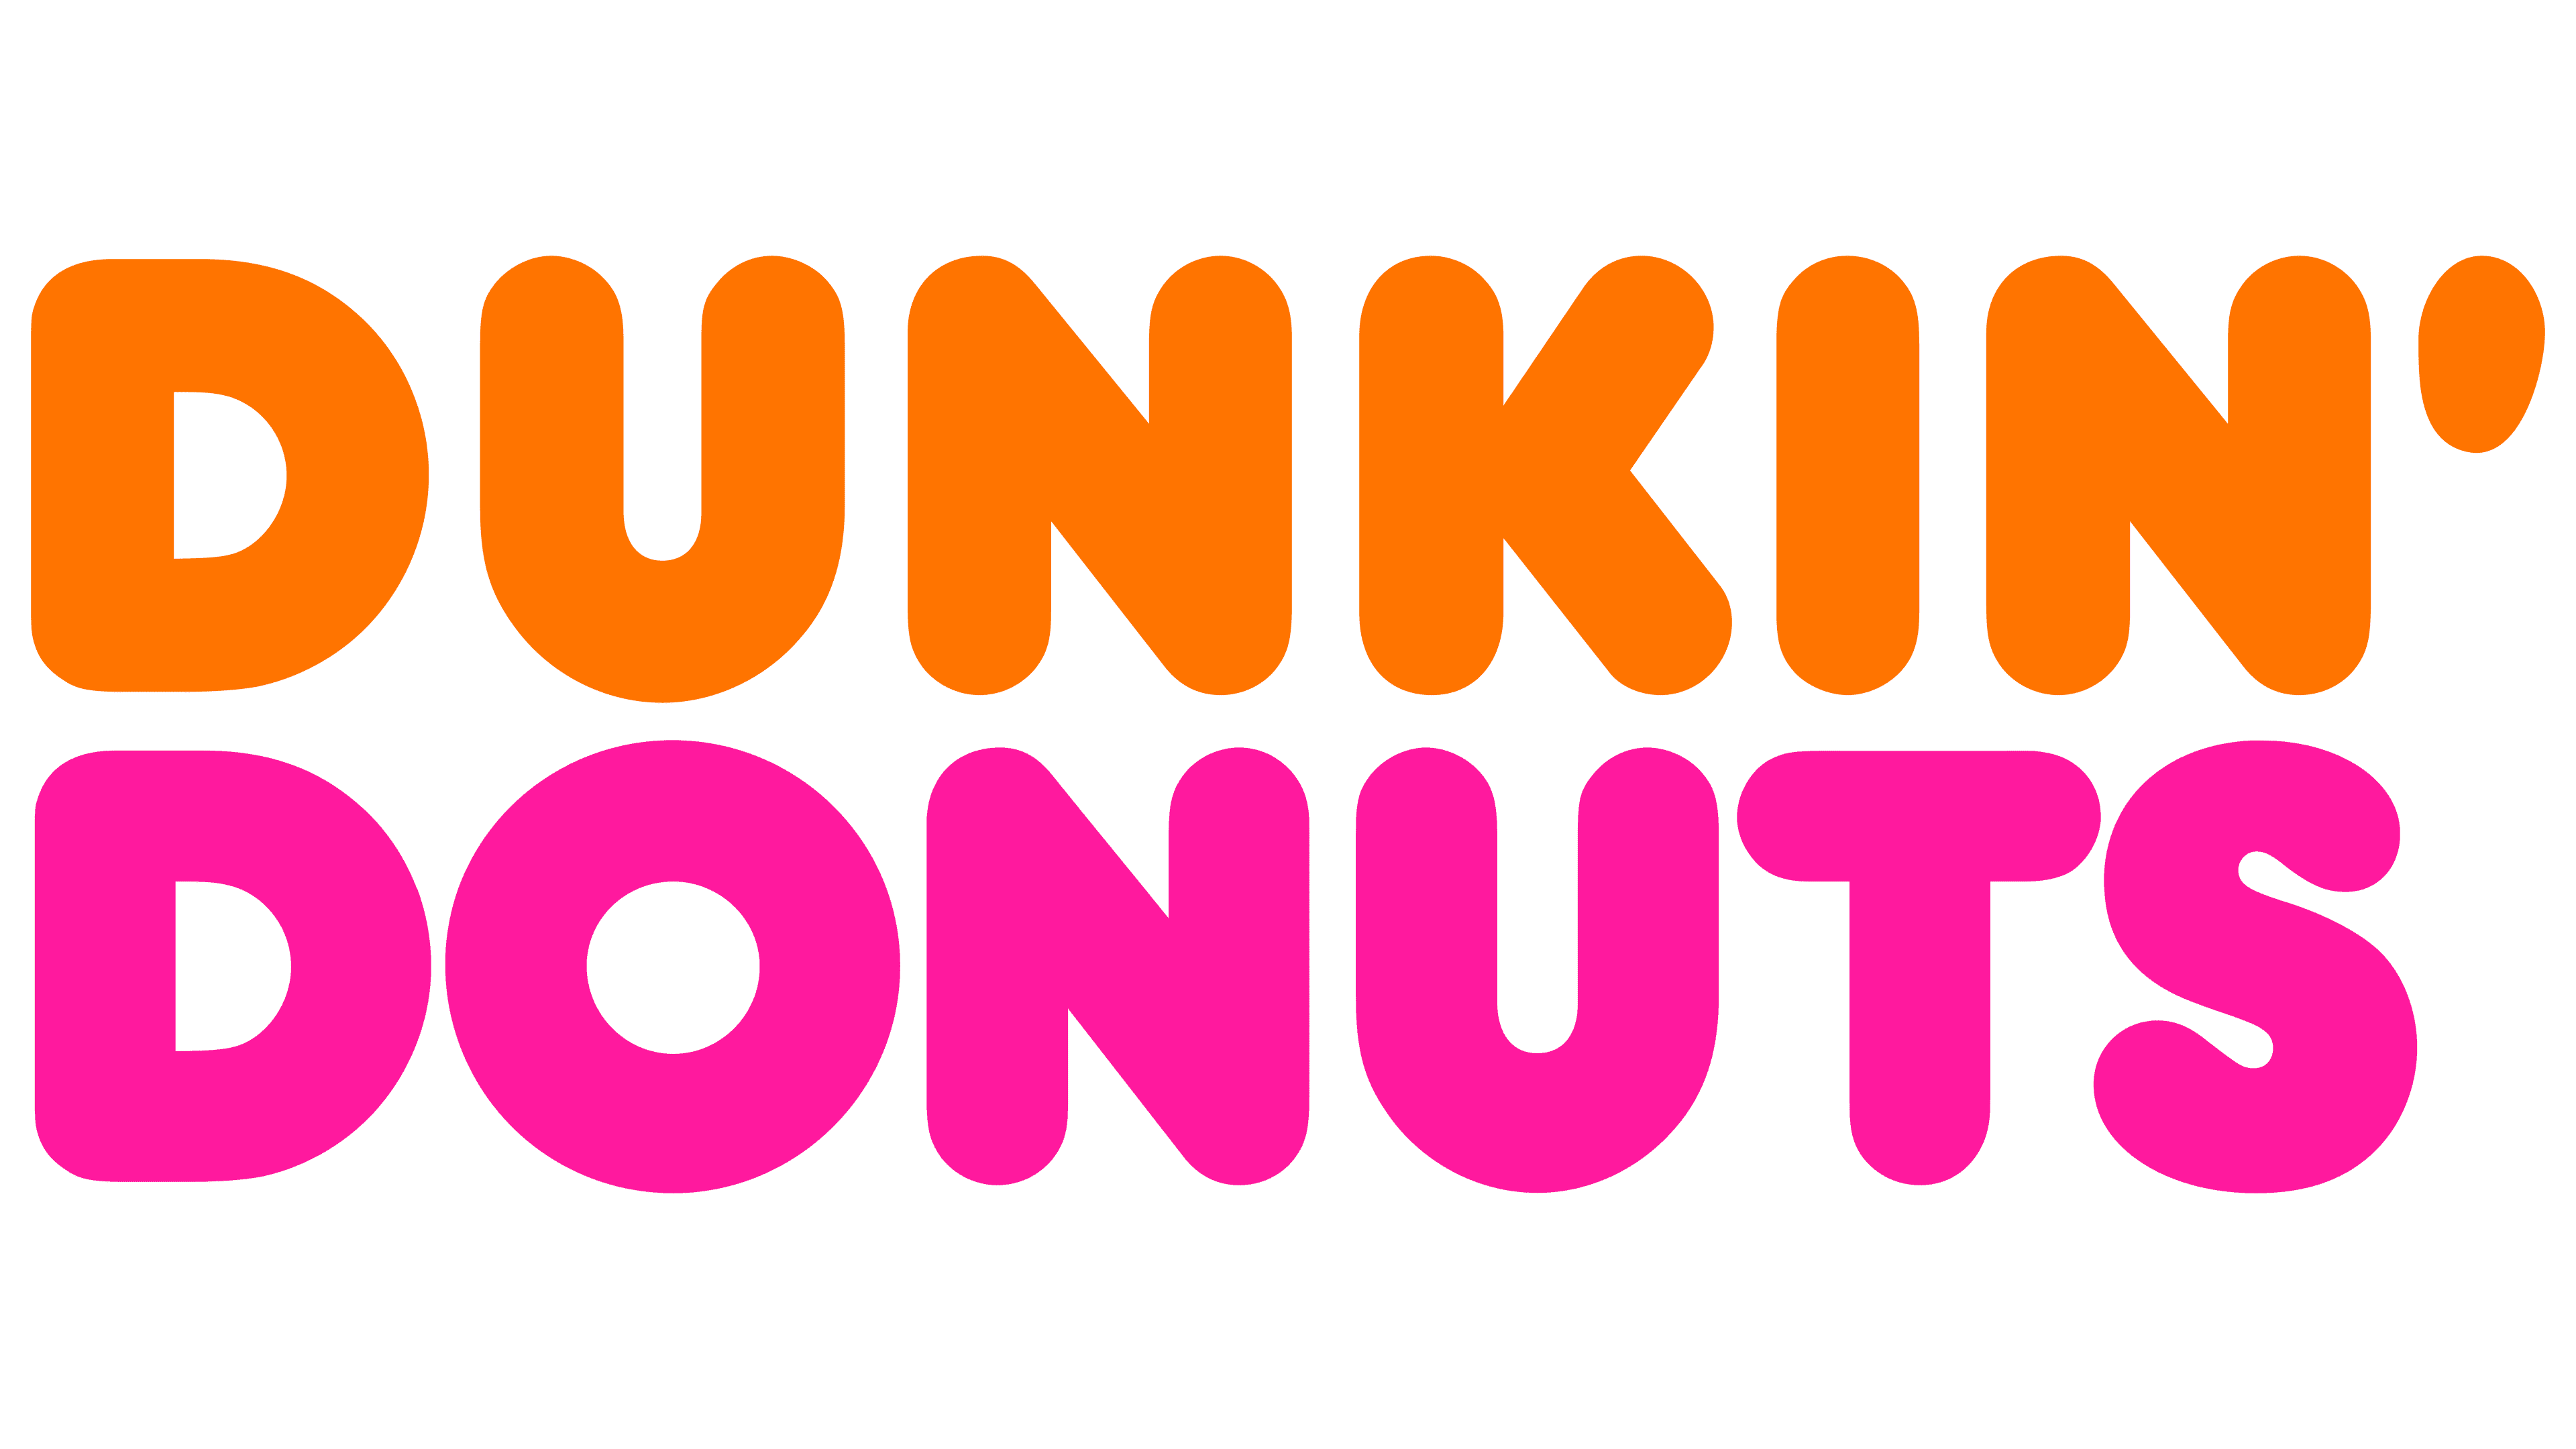 In 1976, the logo was redesigned: the cup and donut were replaced with the ...